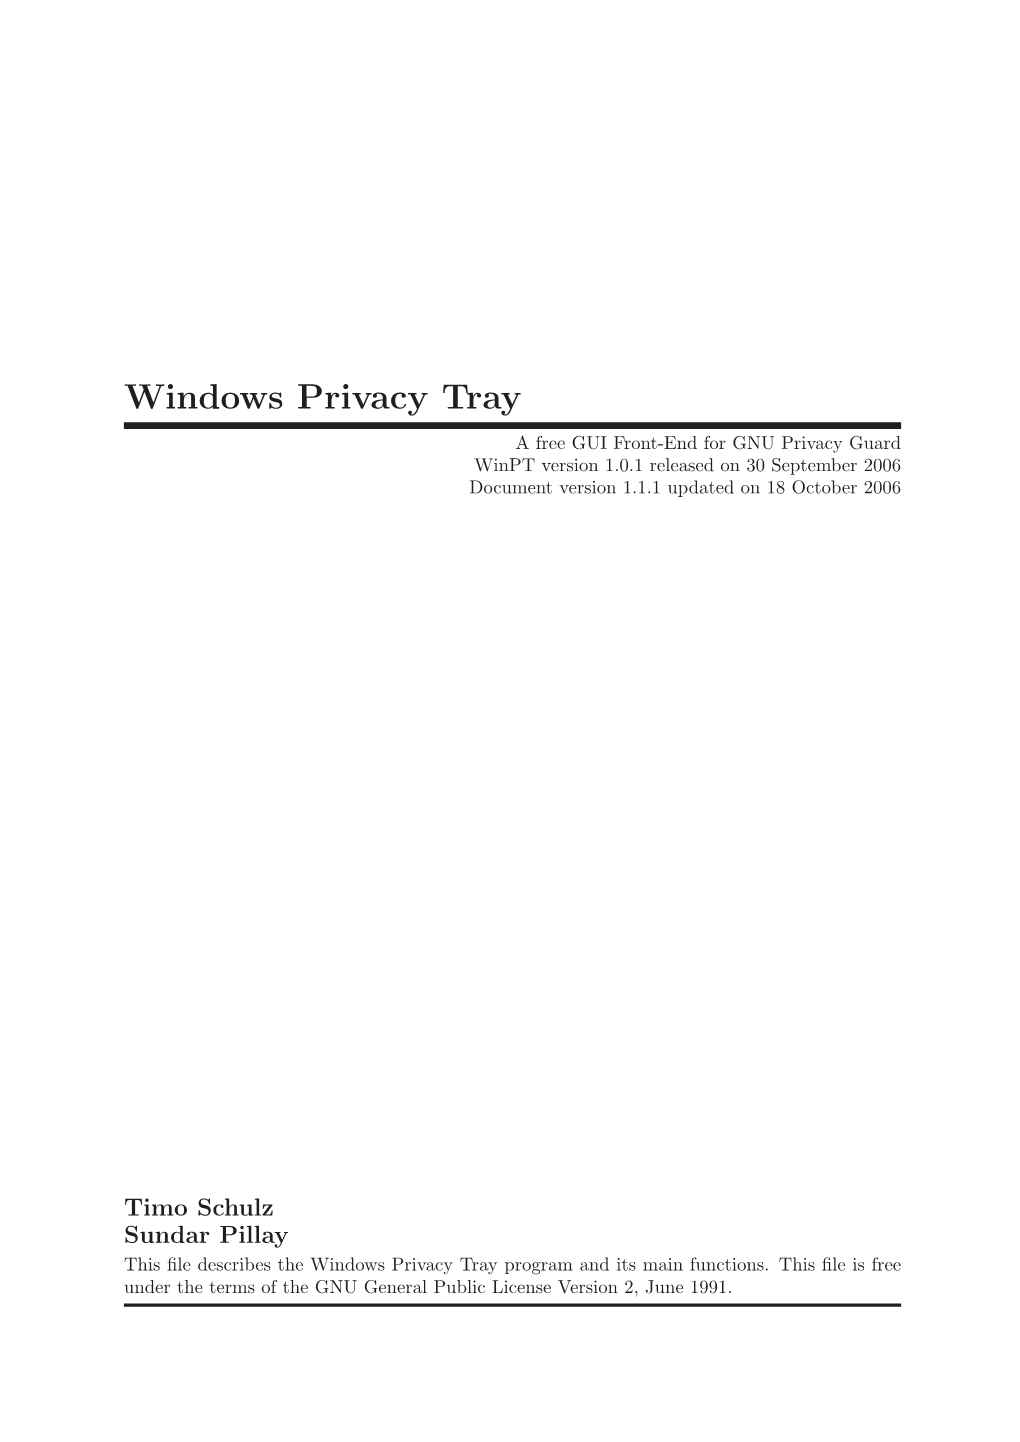 Windows Privacy Tray a Free GUI Front-End for GNU Privacy Guard Winpt Version 1.0.1 Released on 30 September 2006 Document Version 1.1.1 Updated on 18 October 2006